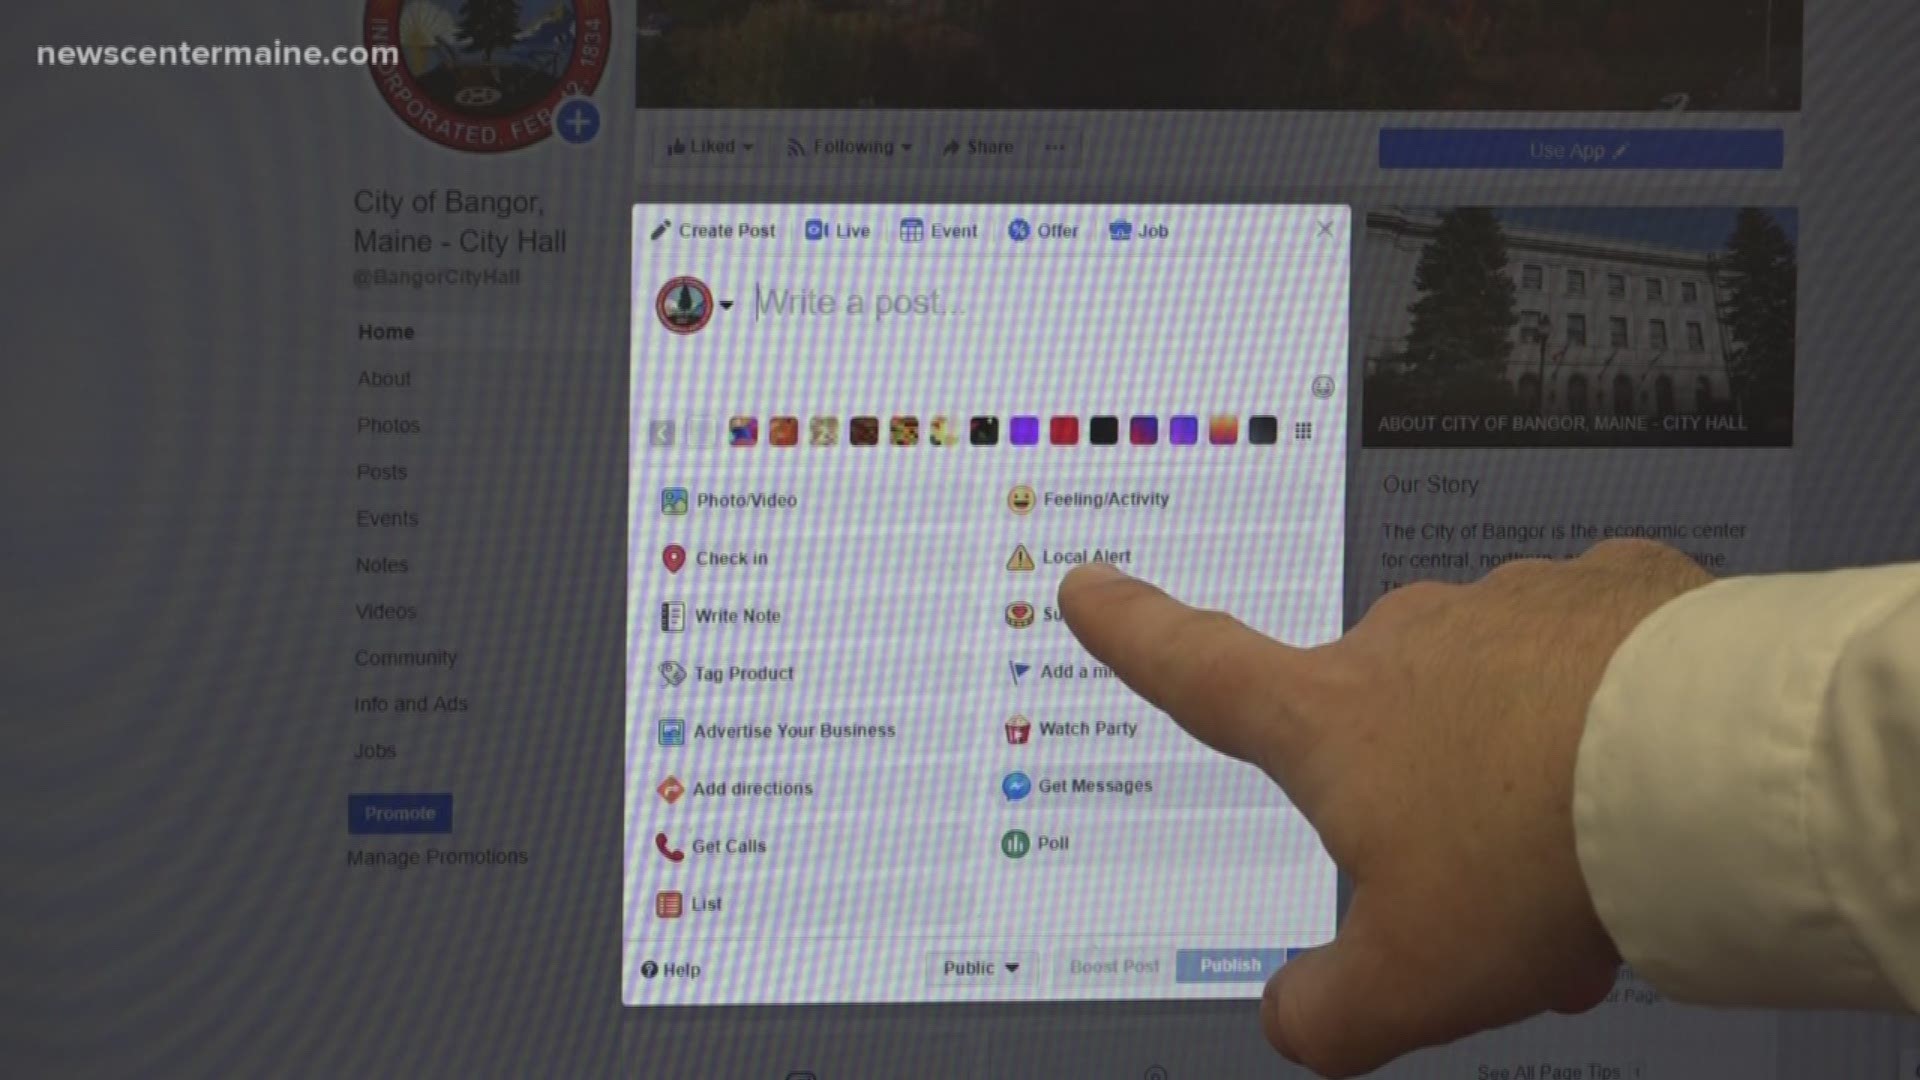 Bangor is the only city in Maine that Facebook is using to test a new safety alert system.